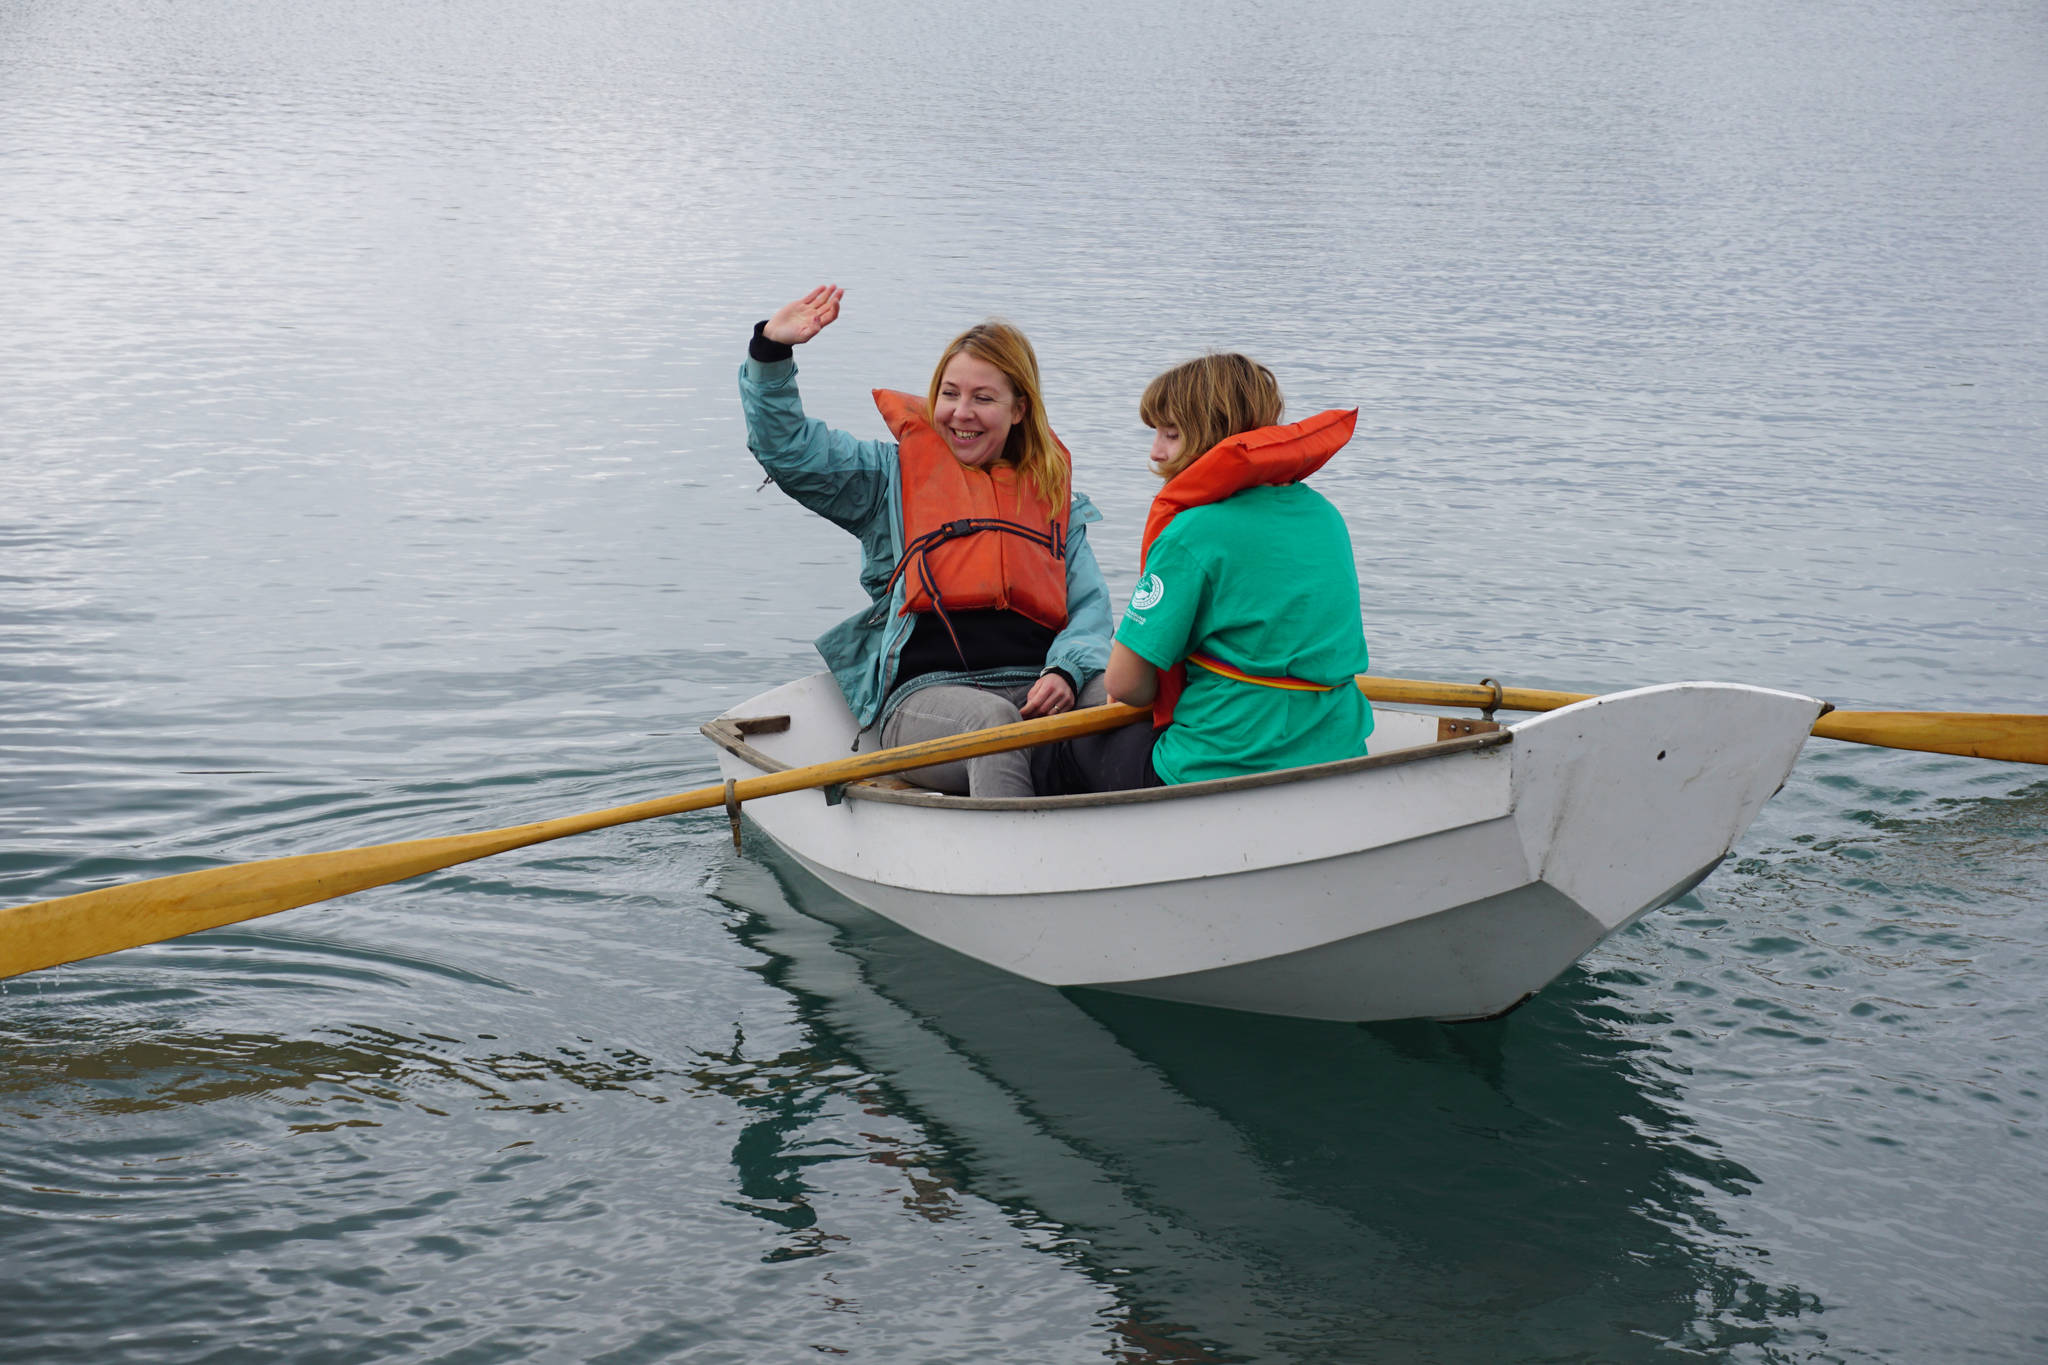 Jenya Anichenko waves as her daughter Tatiana Rogers rows a boat during the Kachemak Bay Wooden Boat Society Festival on Saturday, Sept. 2, 2017 at the Nick Dudiak Fishing Lagoon campground in Homer, Alaska. (Photo by Michael Armstrong, Homer News)